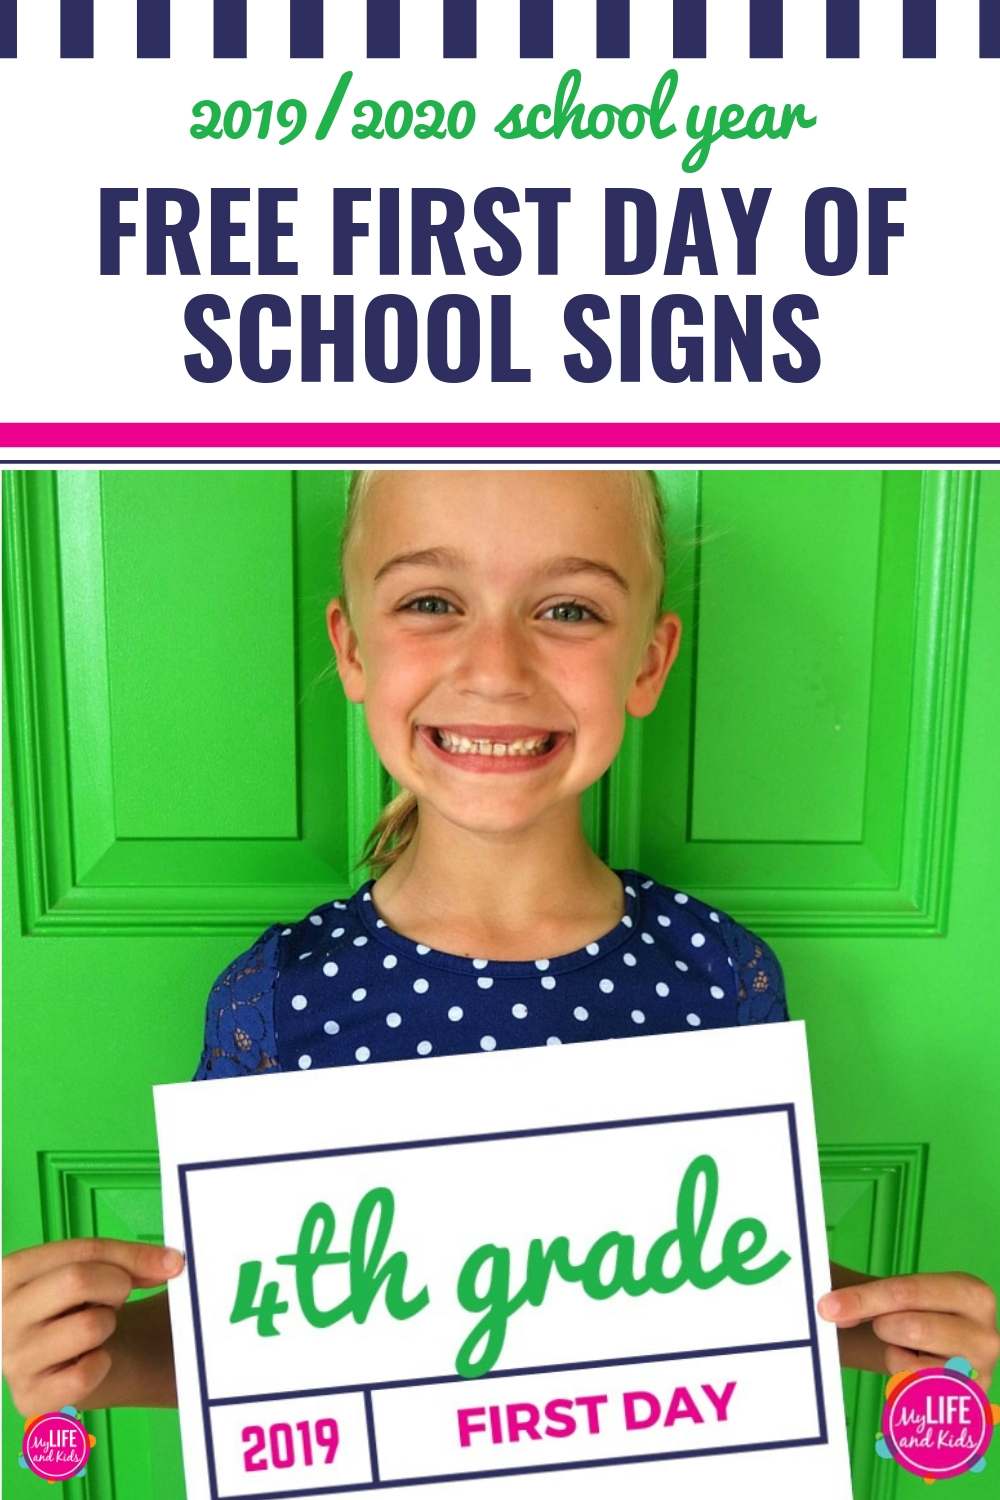 Free First Day of School Signs - My Life and Kids